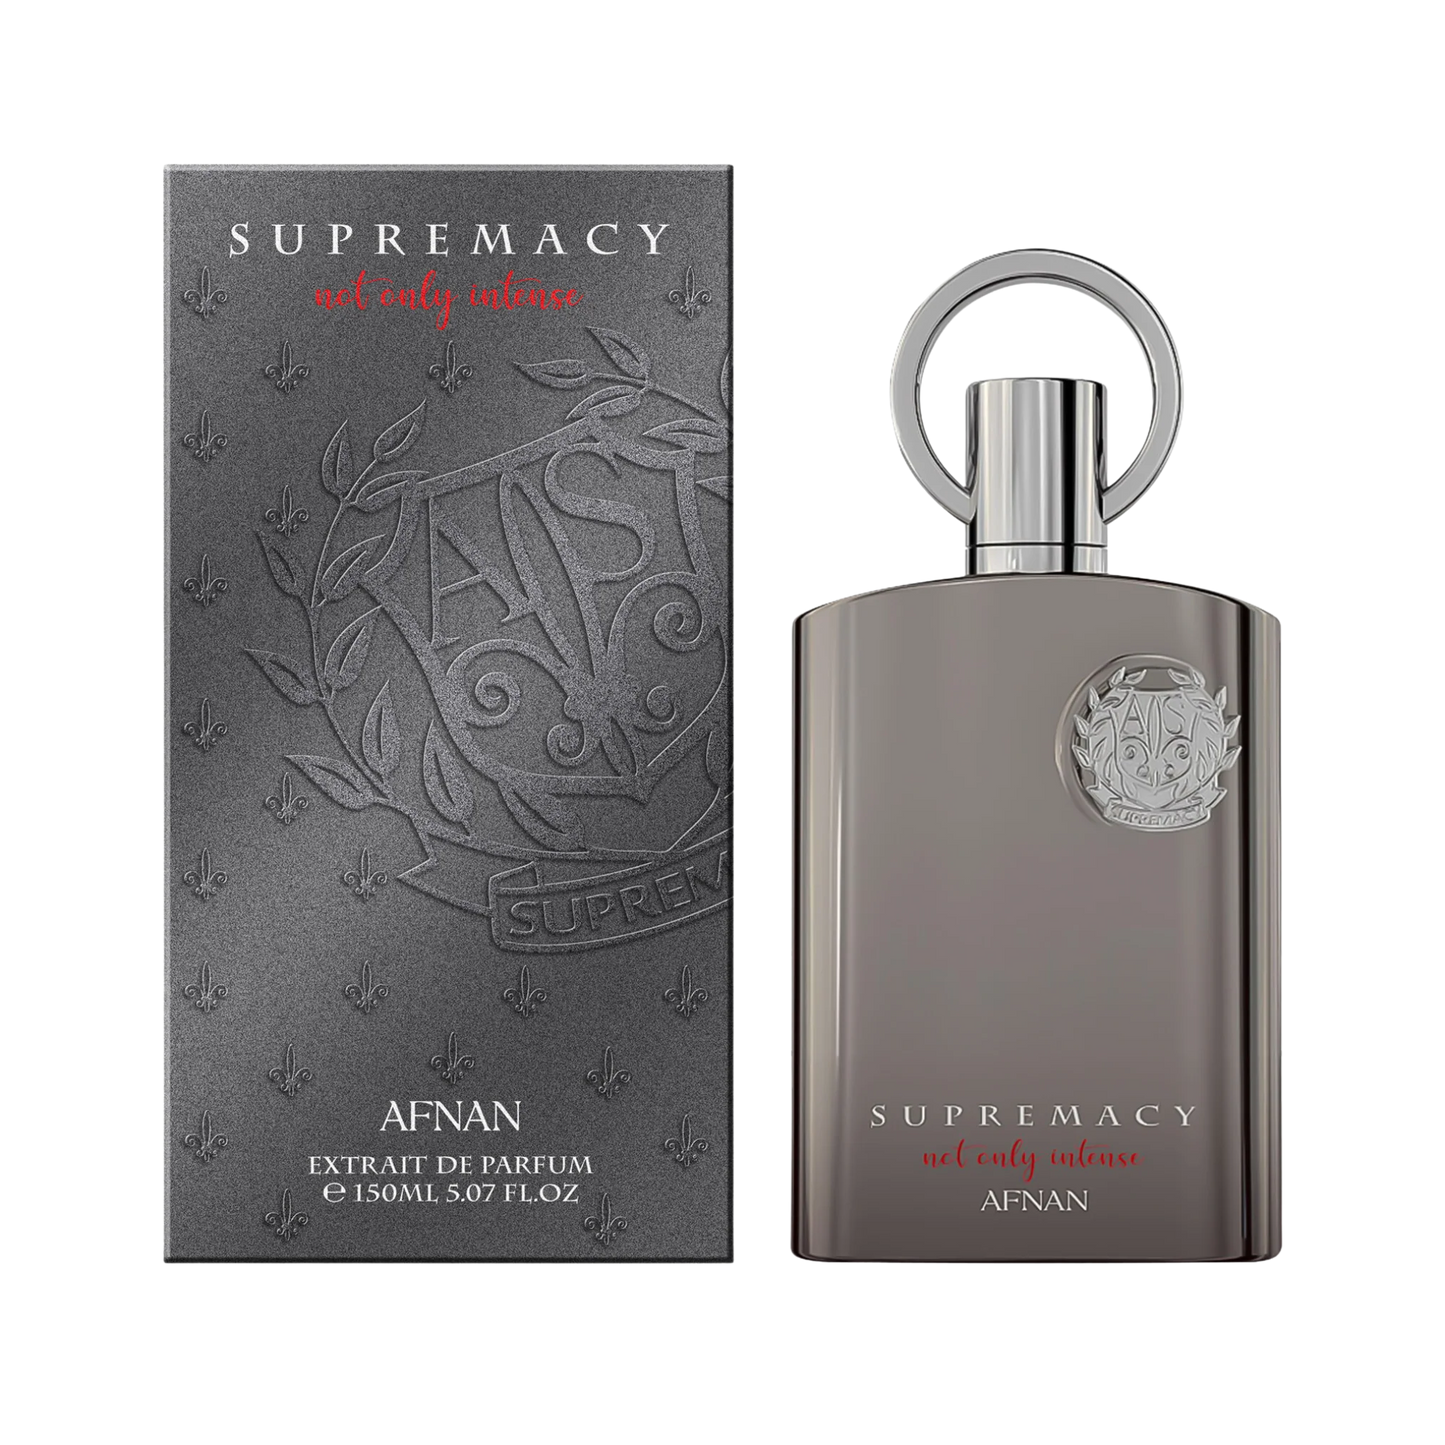 Supremacy not only Intense dupe aventus - Afnan